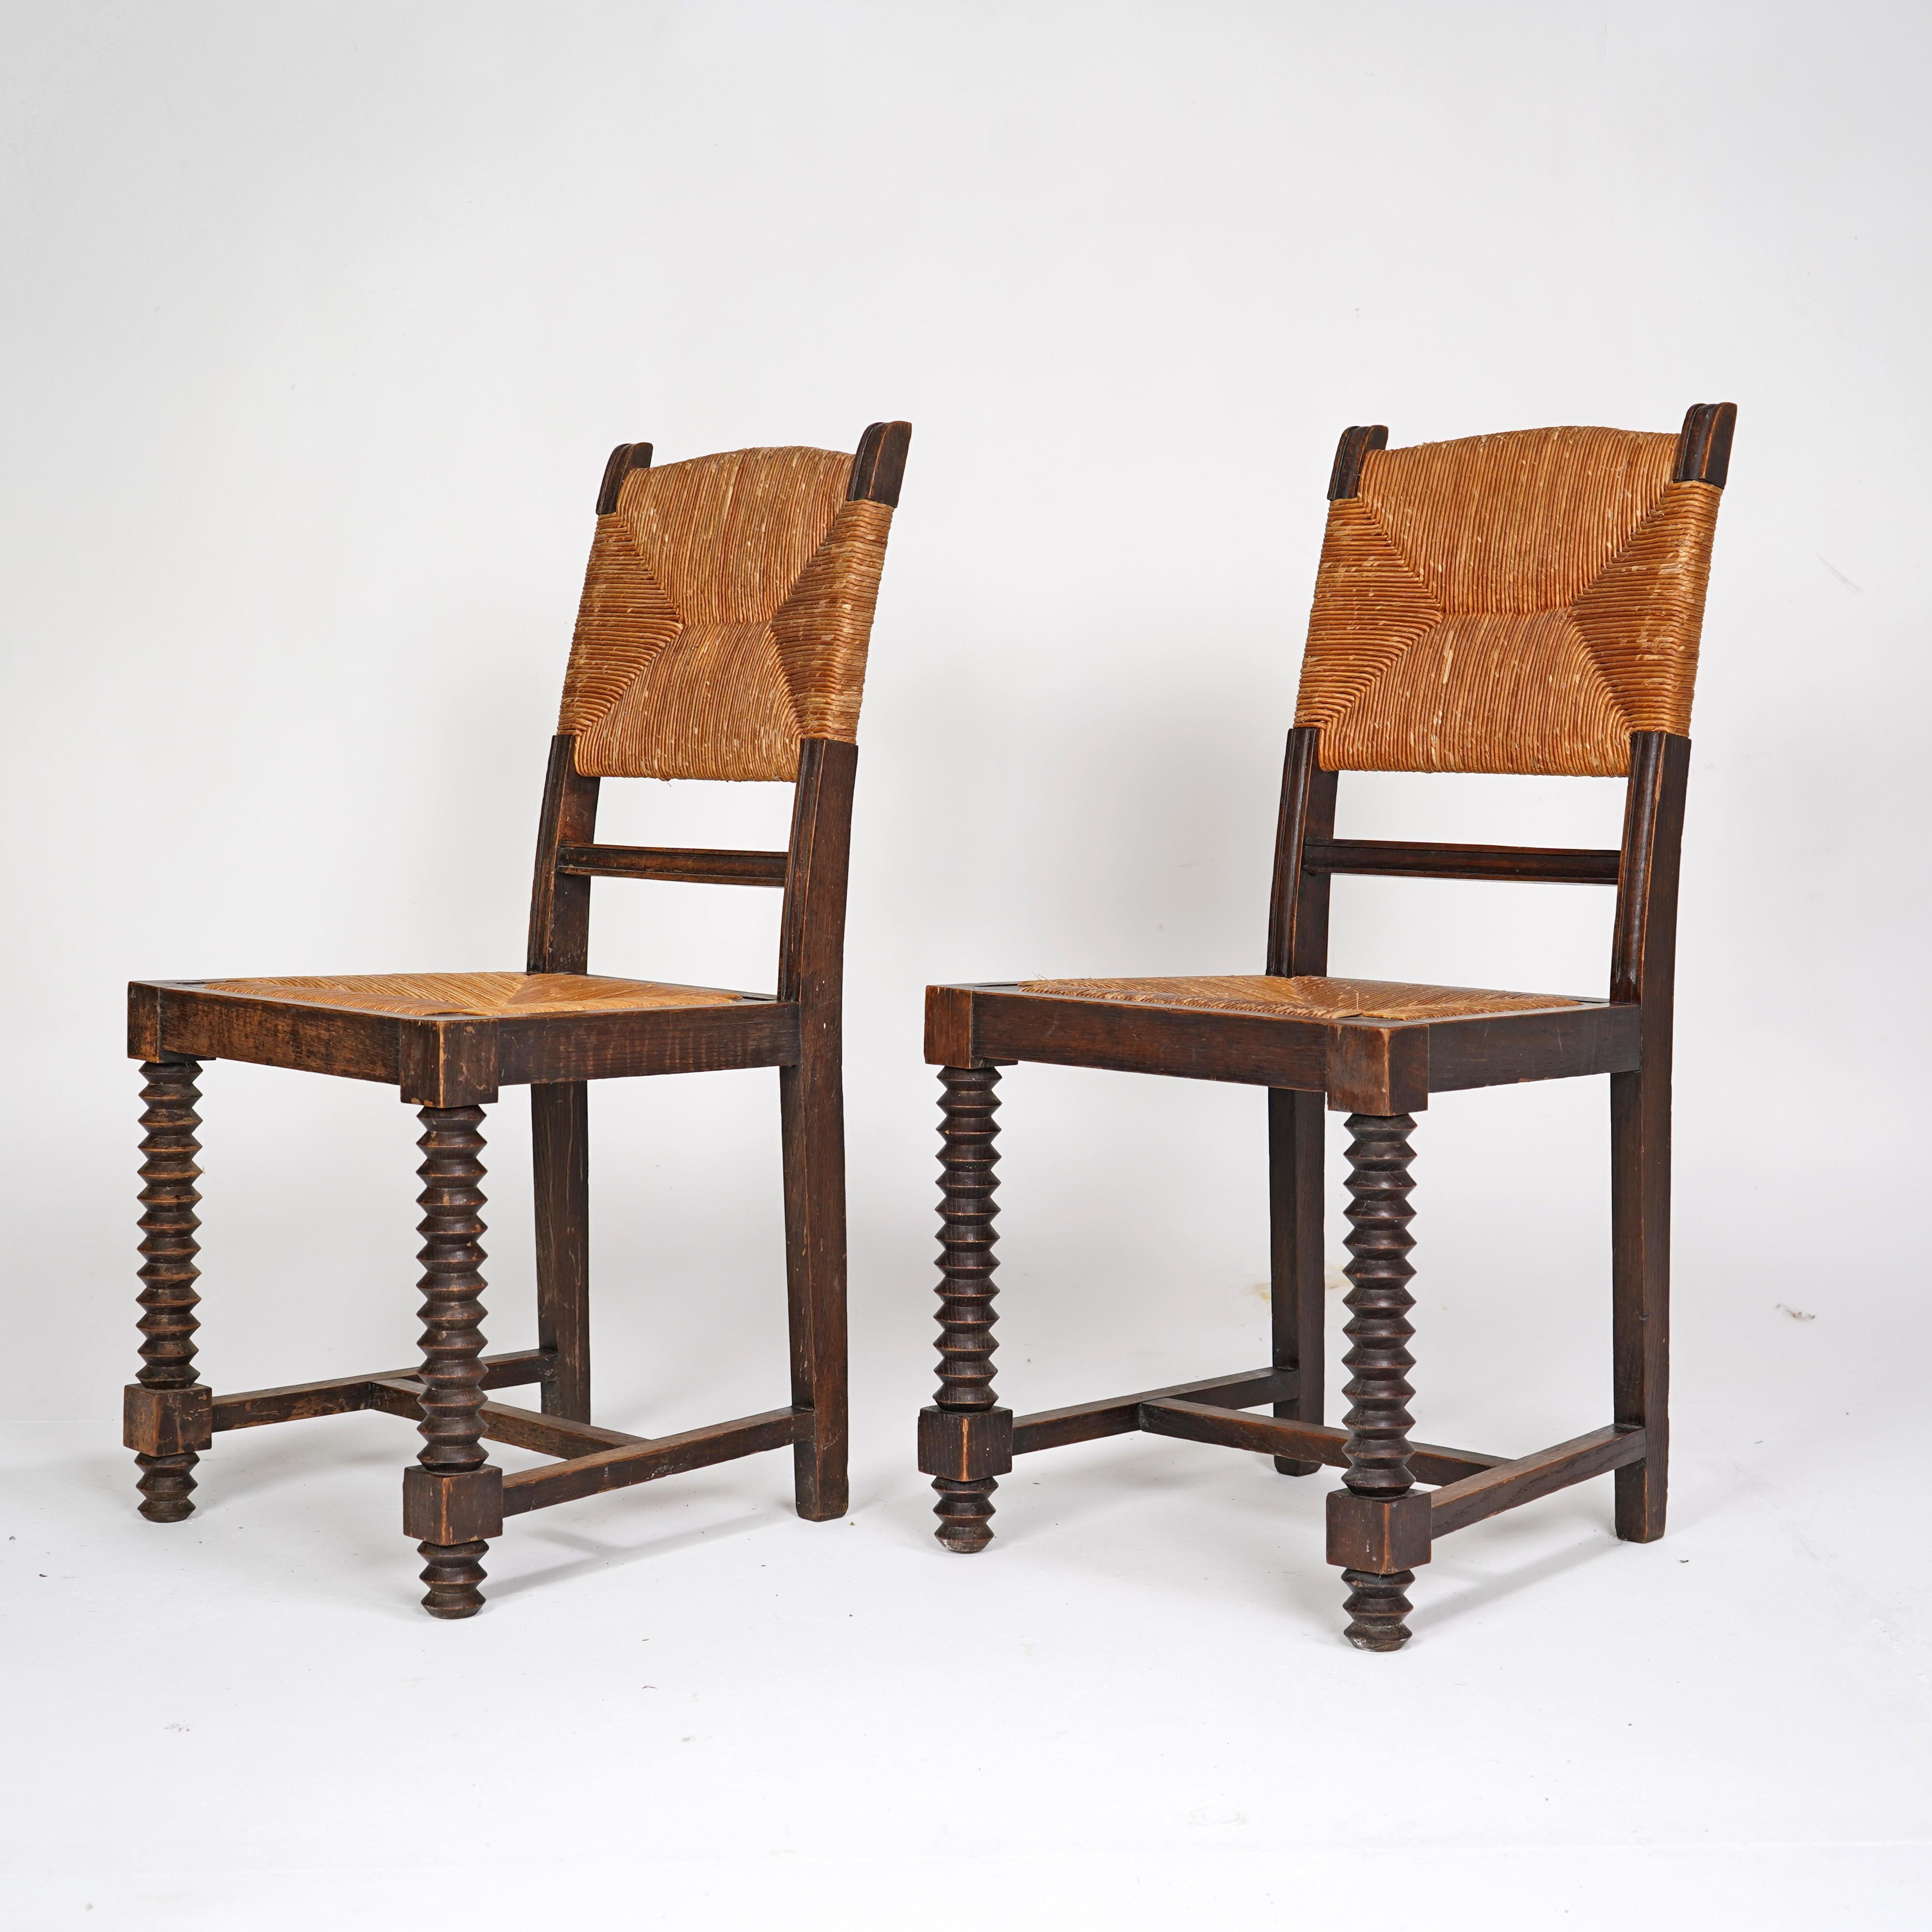 Mid-Century Modern Pair Of French Charles Dudouyt Style Chairs - Wooden with Rush Seat For Sale